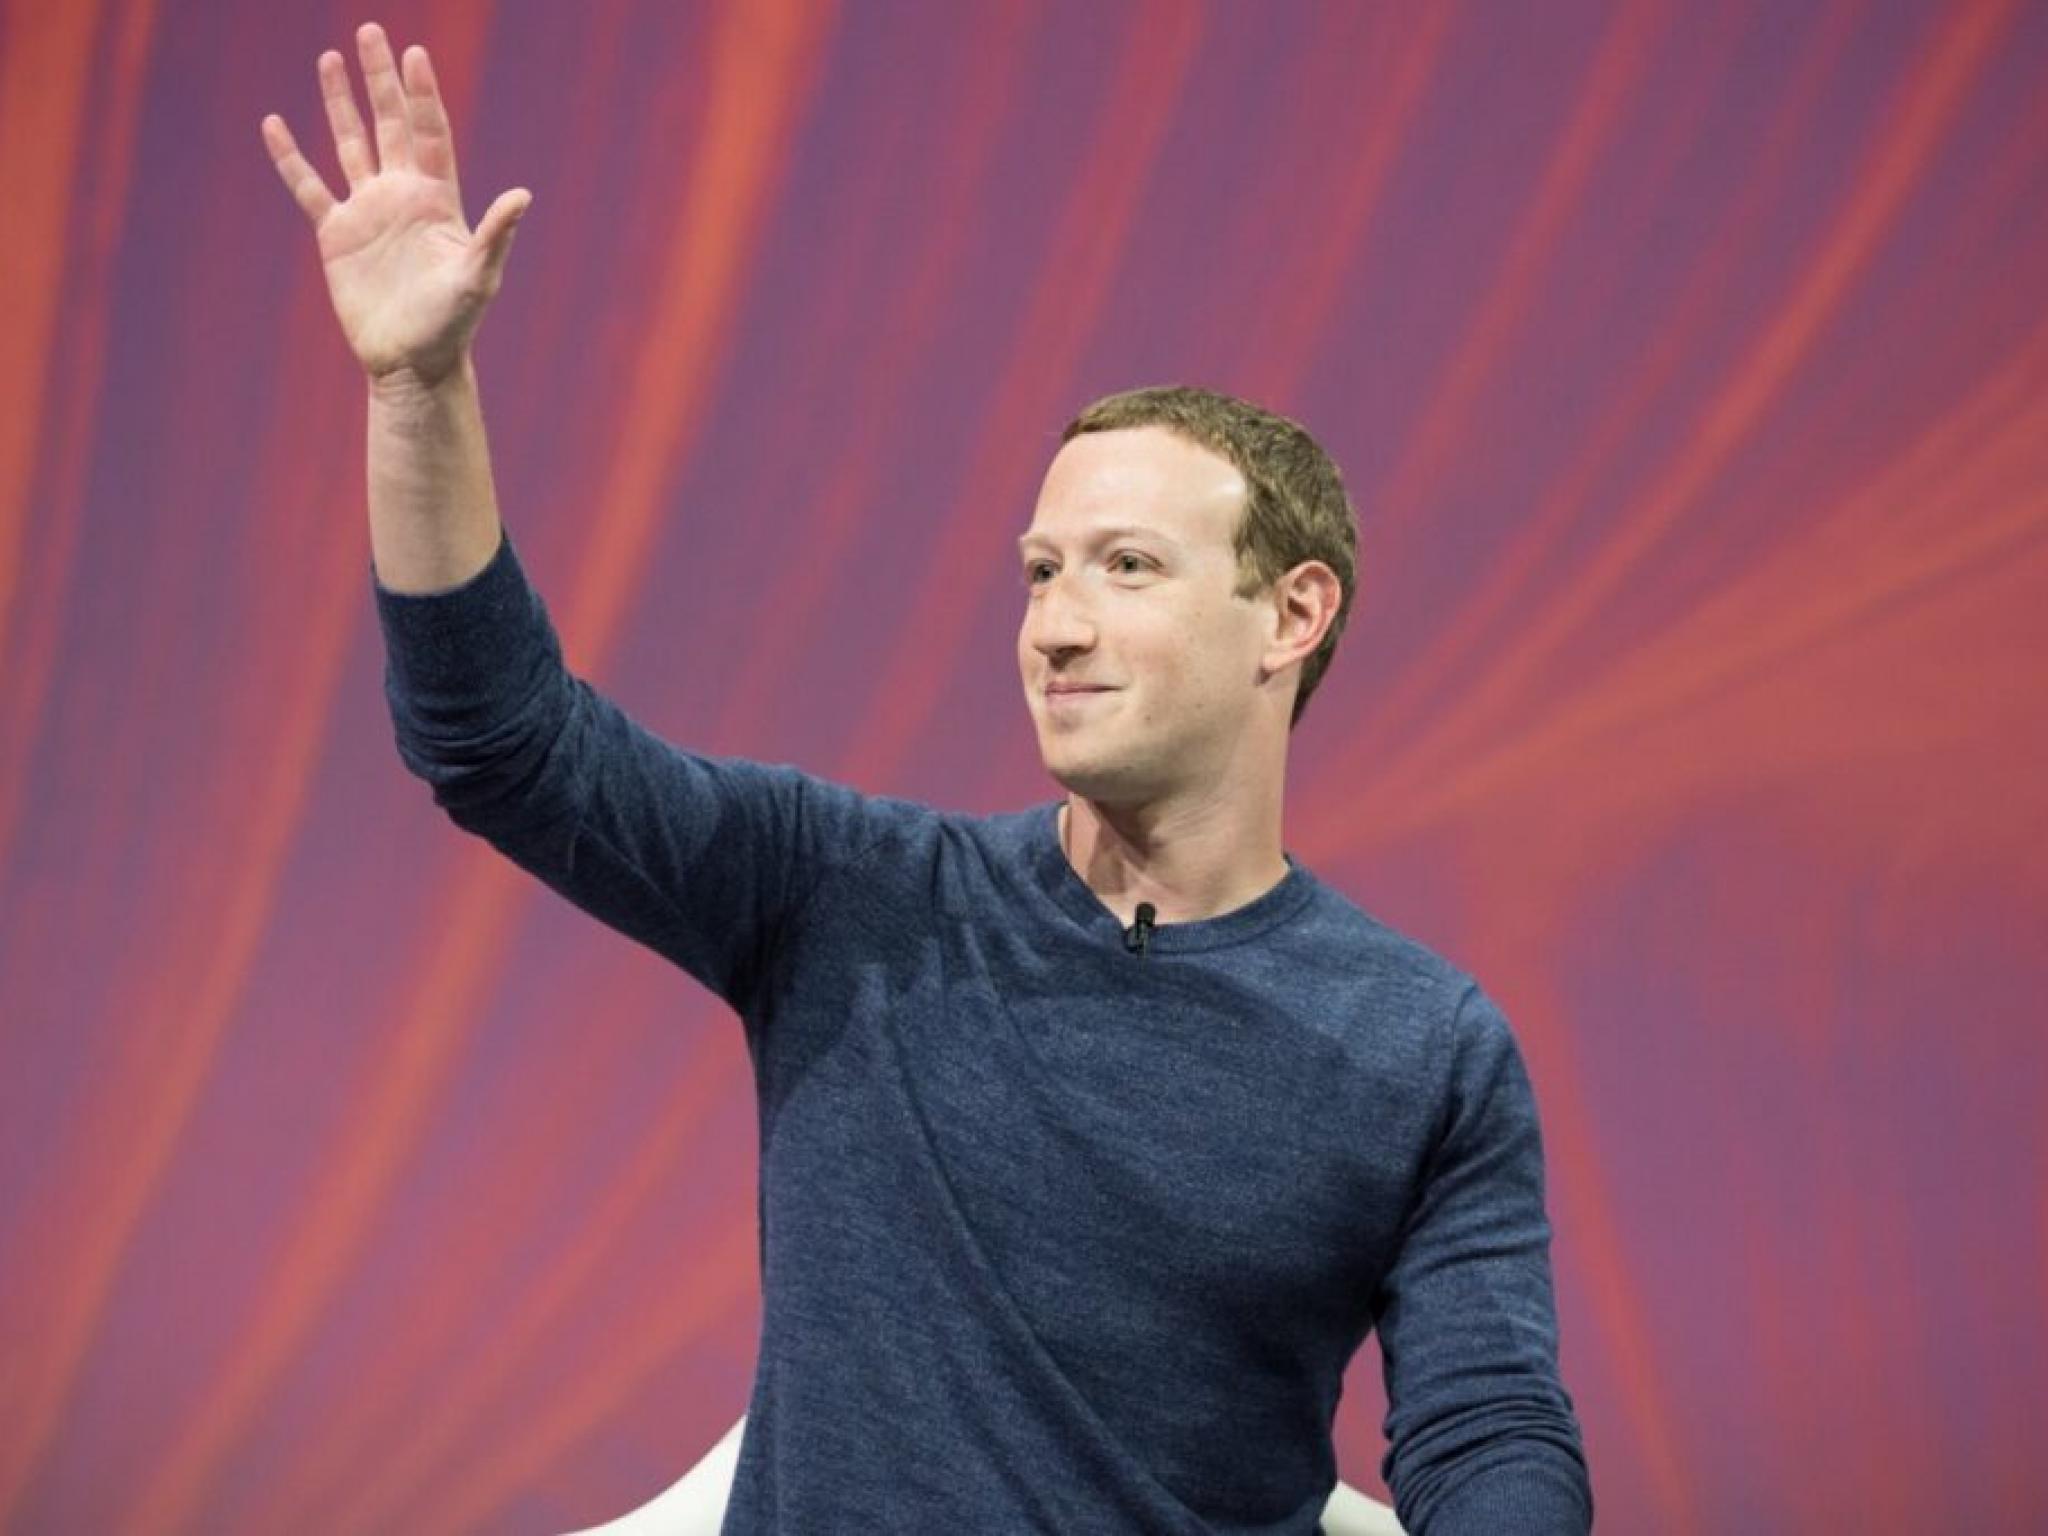  mark-zuckerberg-shifts-metas-focus-to-ai-agents-over-chatbots-apple-to-pursue-similar-holy-grail-predicts-gene-munster 